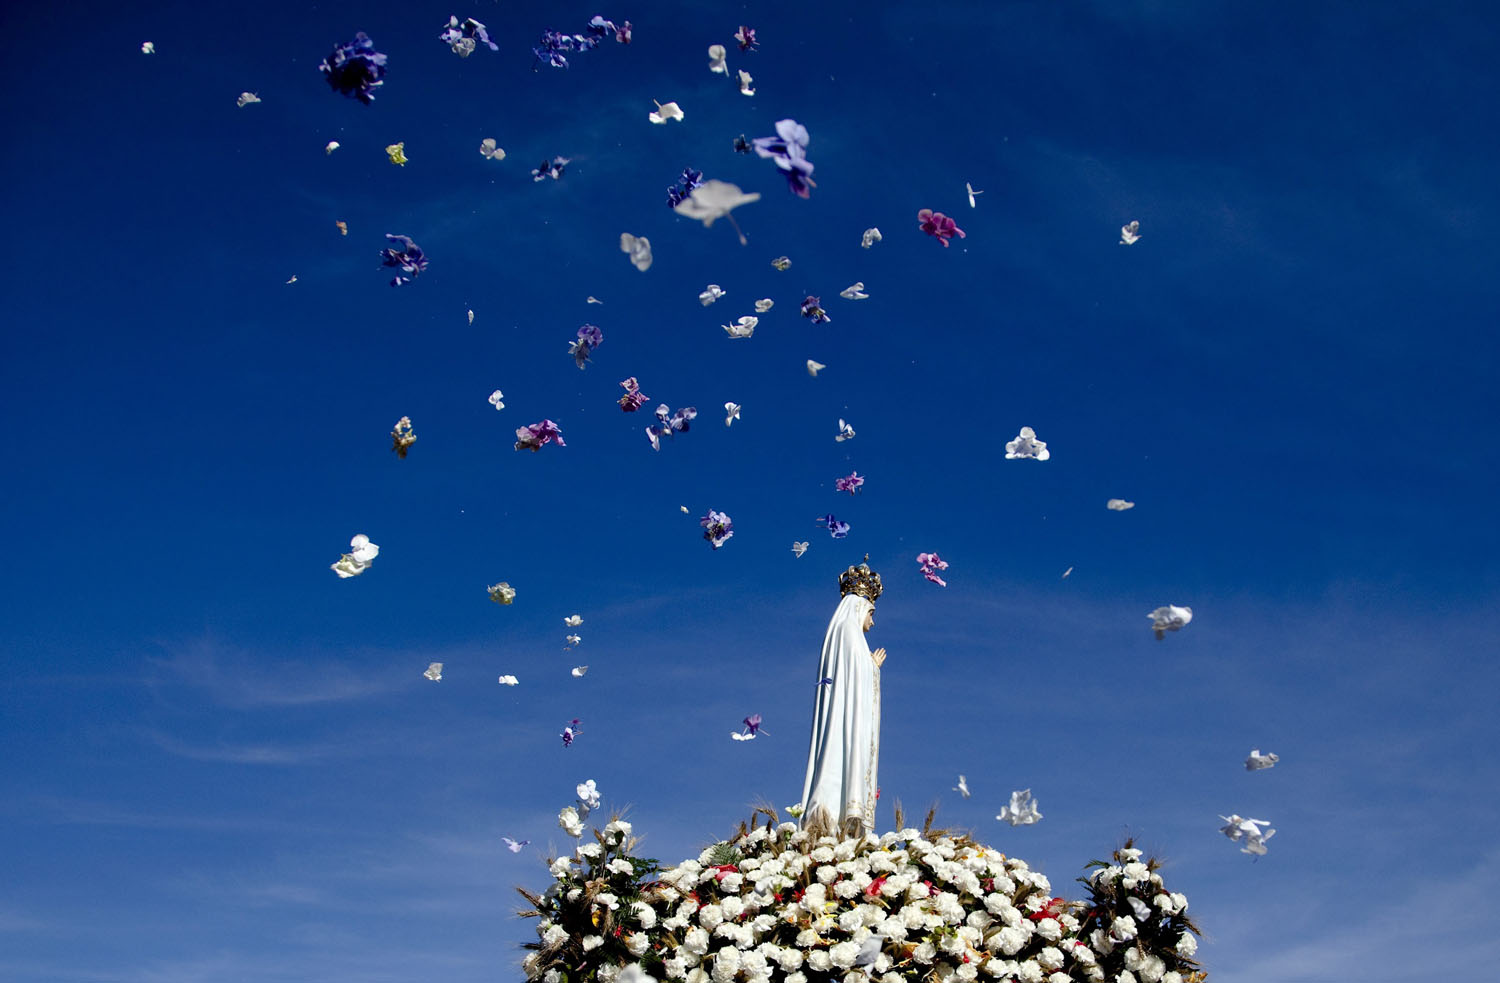 Aug. 13, 2014. Flowers are thrown in the air as the Image of Our Lady of Fatima is carried over at the Fatima Sanctuary during the pilgrimage at Fatima Sanctuary, in Fatima, Portugal.